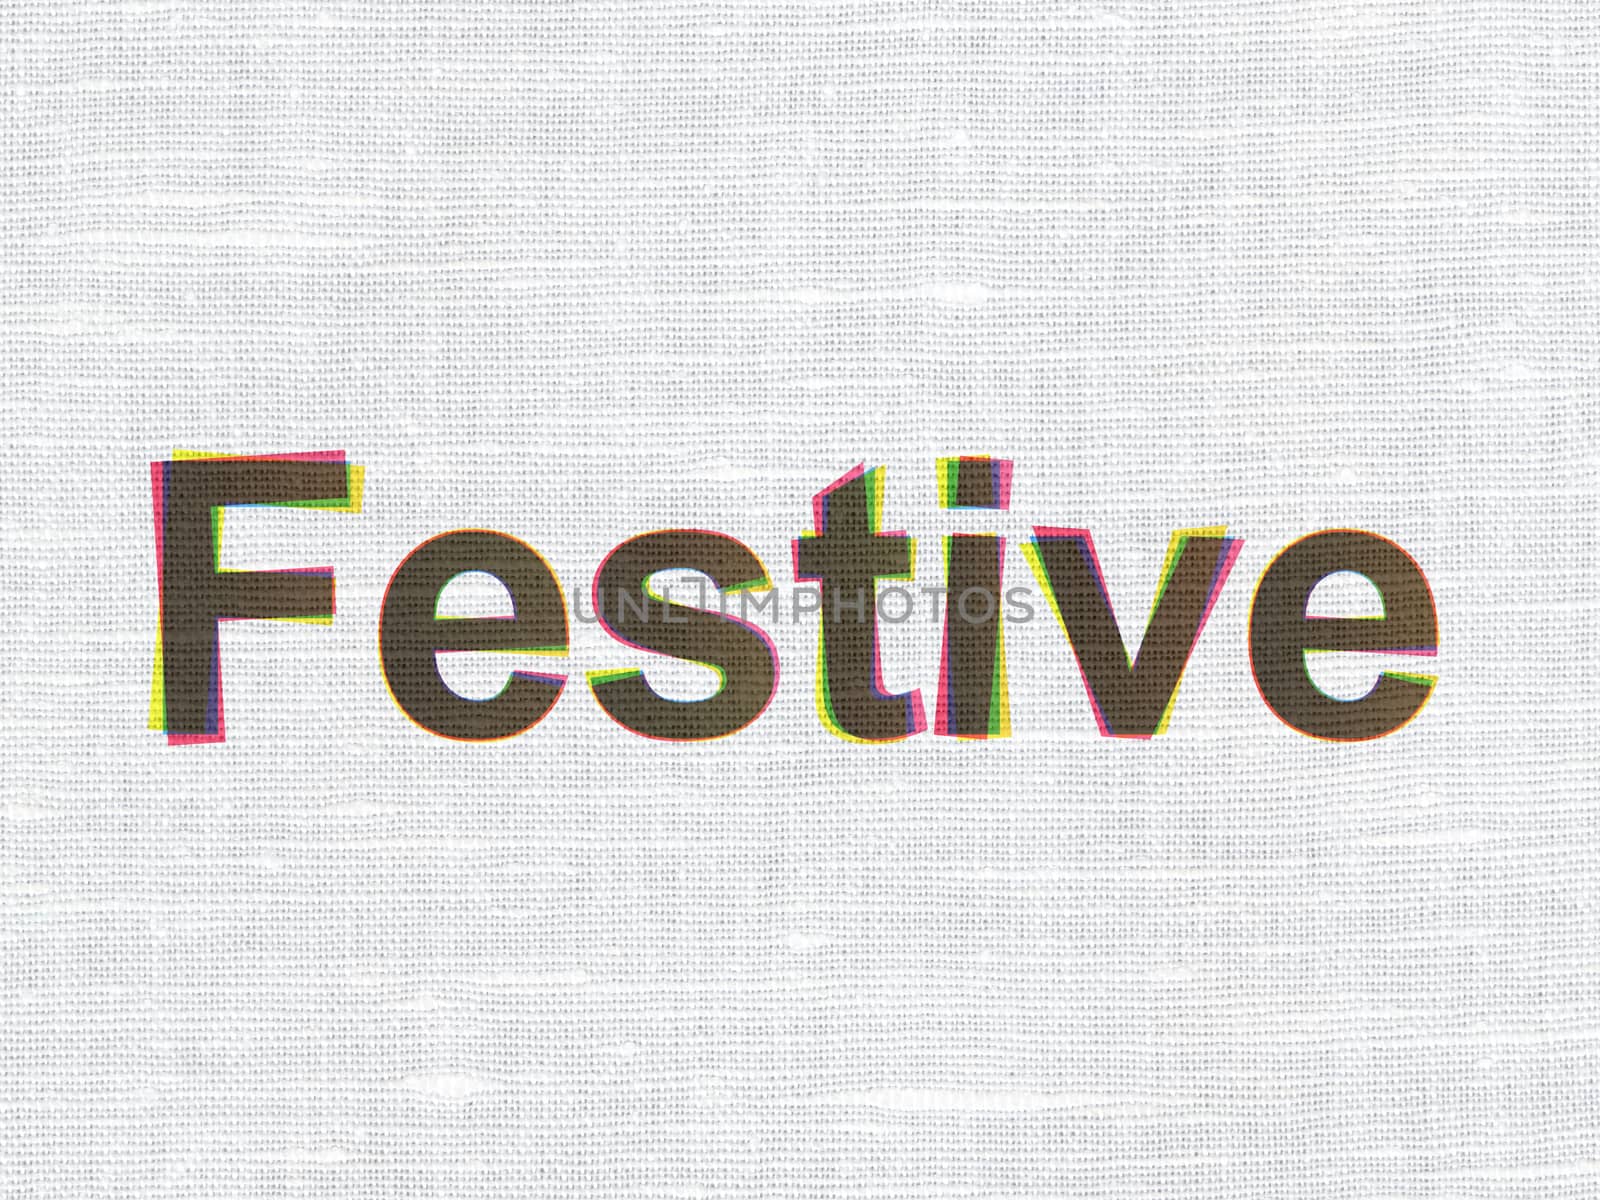 Holiday concept: CMYK Festive on linen fabric texture background